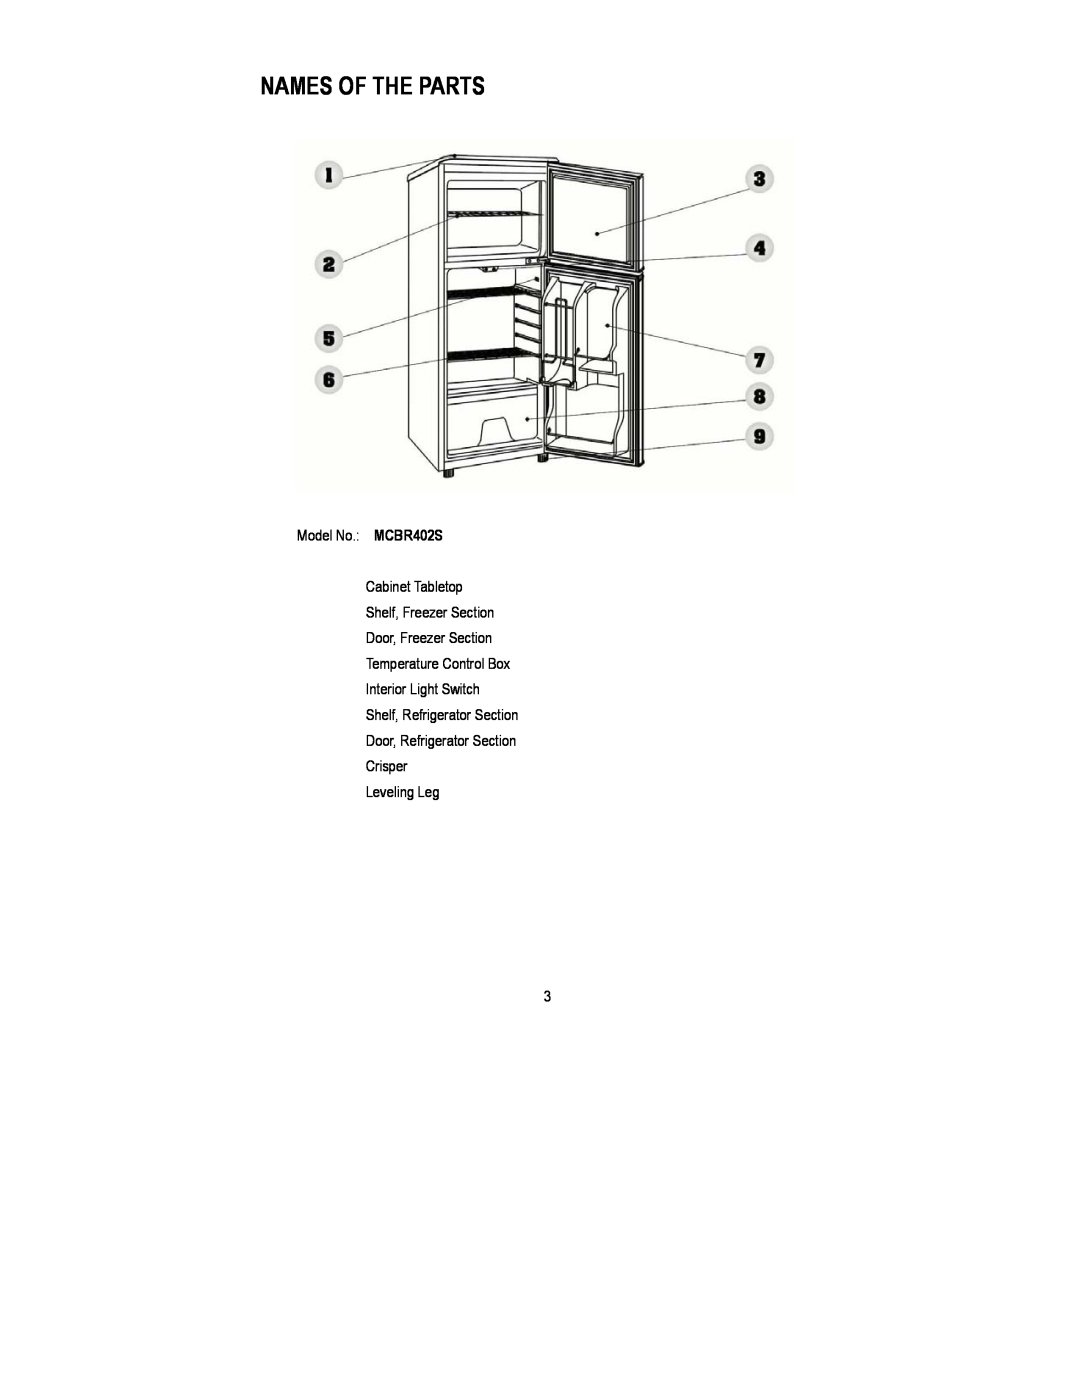 Magic Chef Names Of The Parts, Model No.: MCBR402S Cabinet Tabletop, Shelf, Freezer Section Door, Freezer Section 